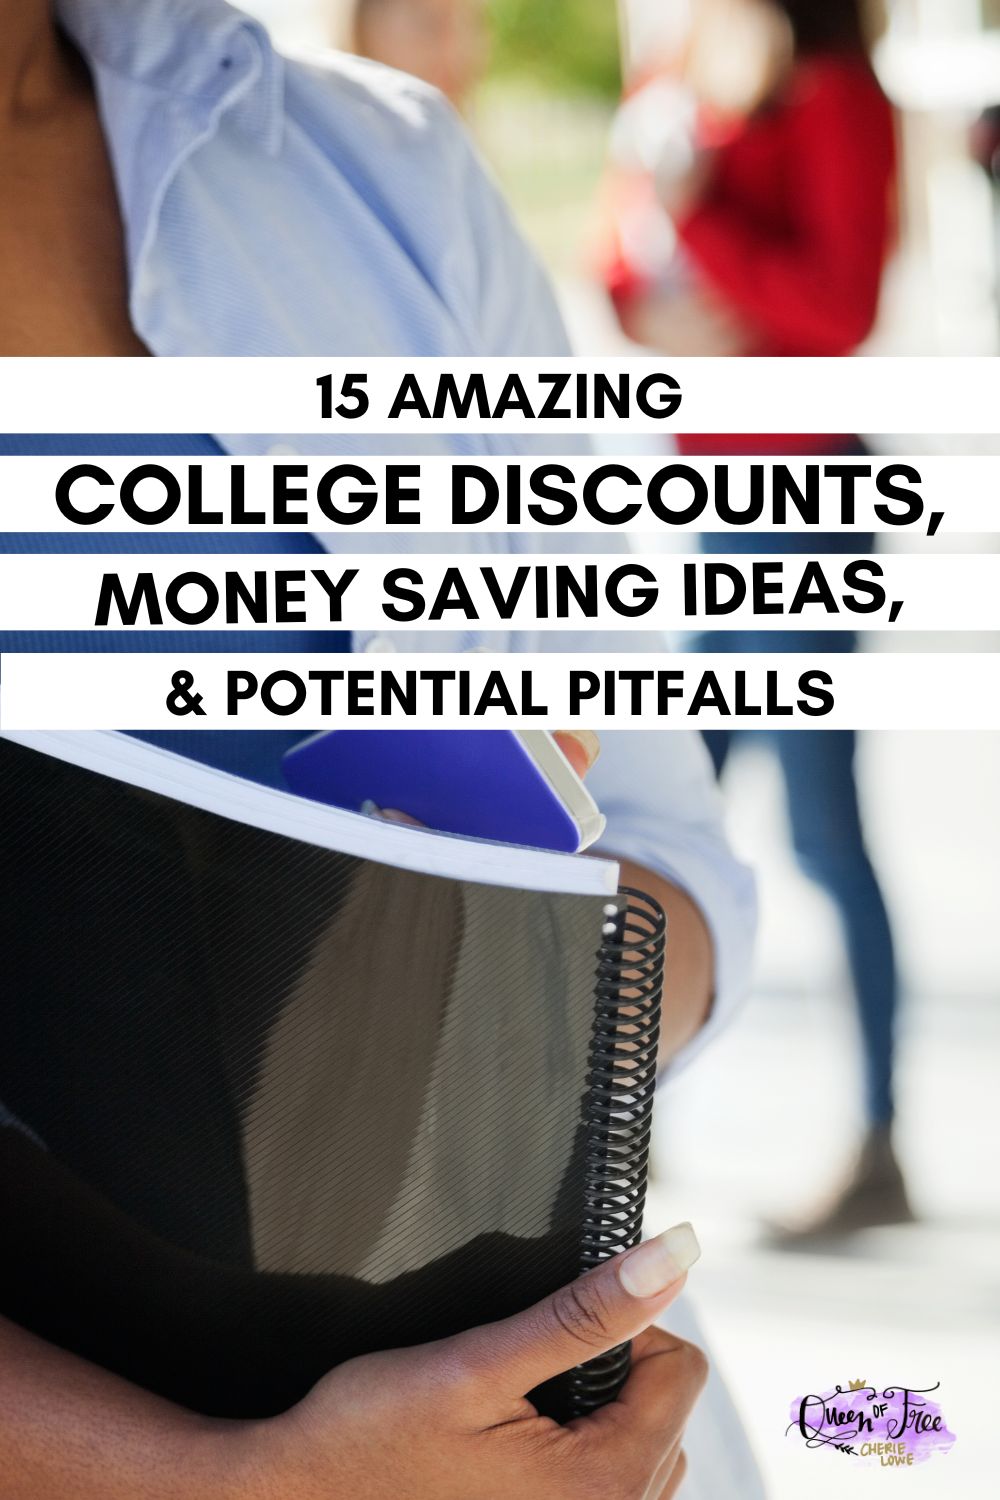 Heading back to campus can be pricey. But don't pay full price. Check out this HUGE list of college discounts, money saving ideas, & more.